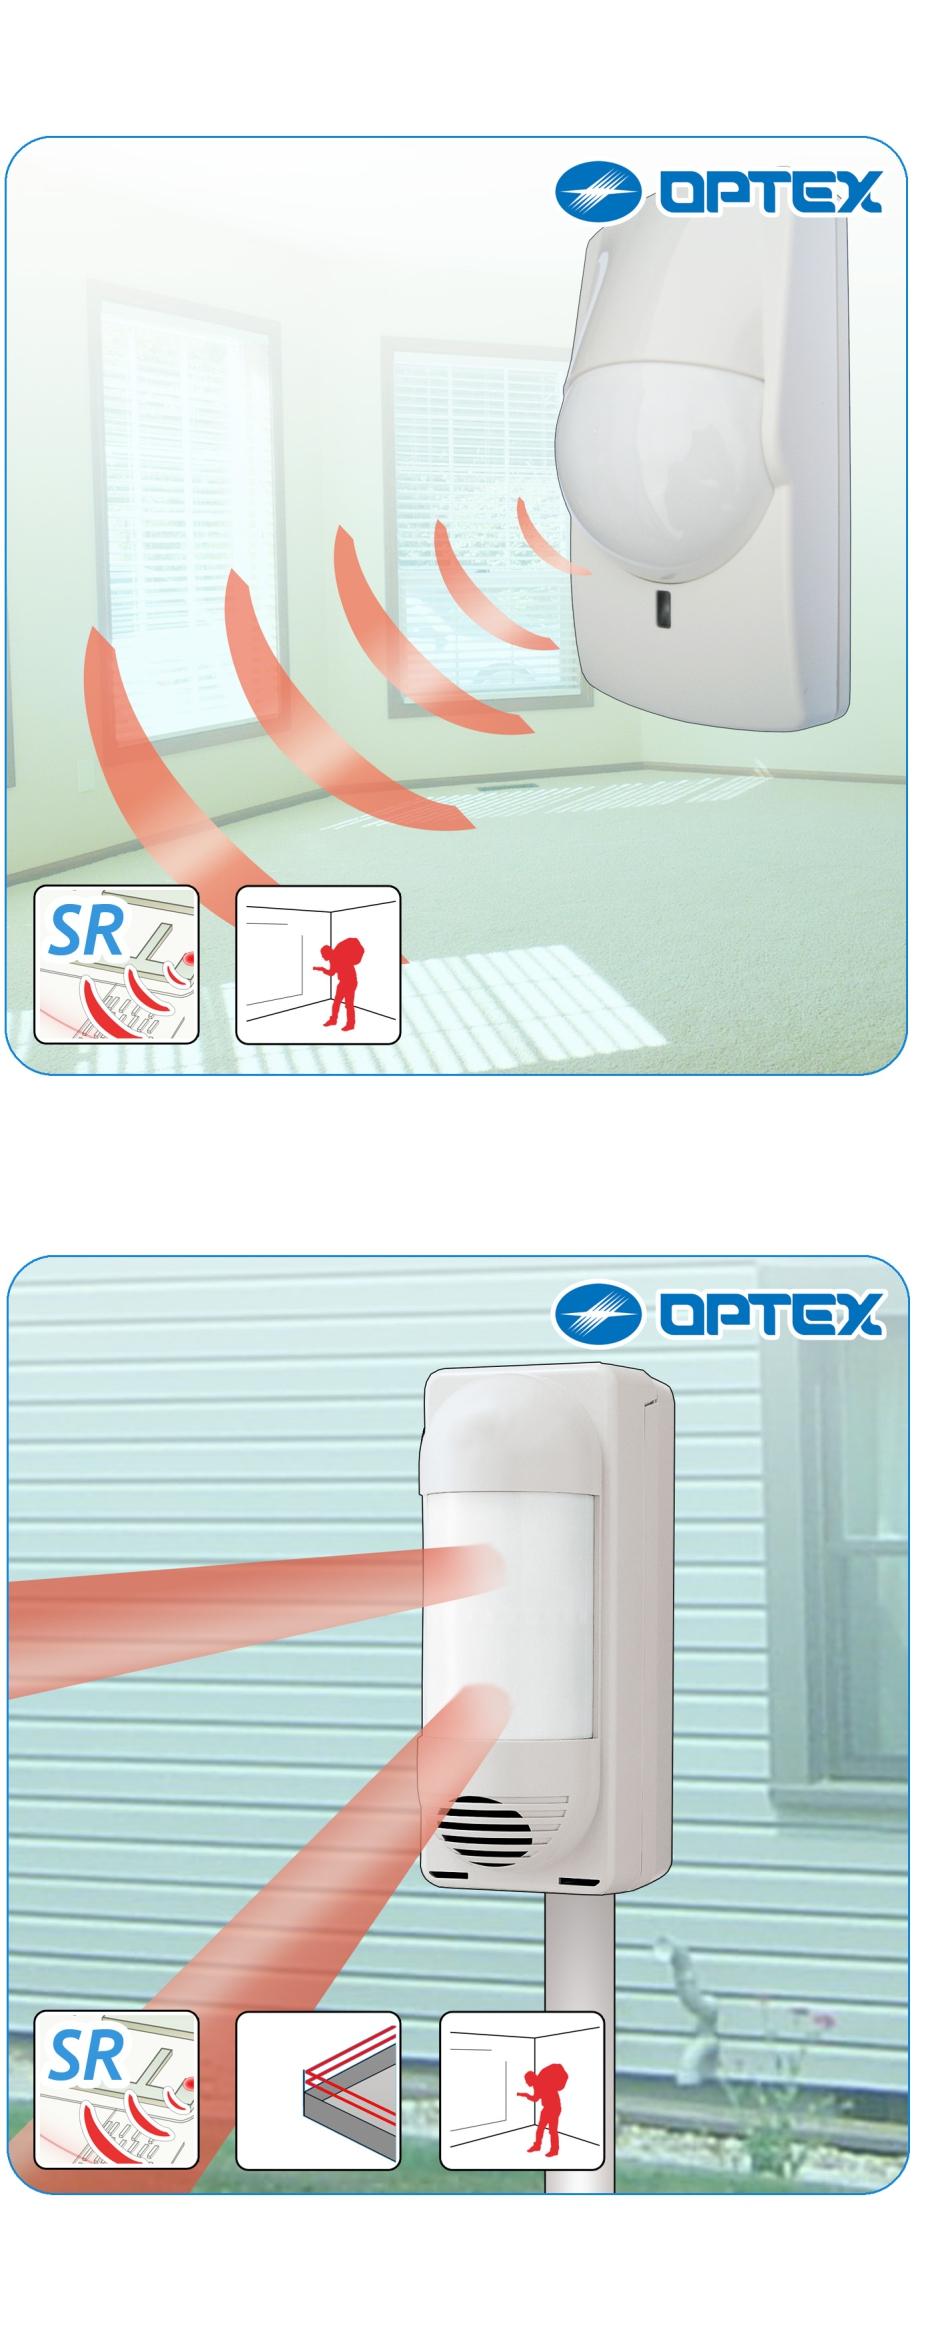 WNX Internal PIR A self-contained battery operated PIR detector suitable for many internal detection applications.